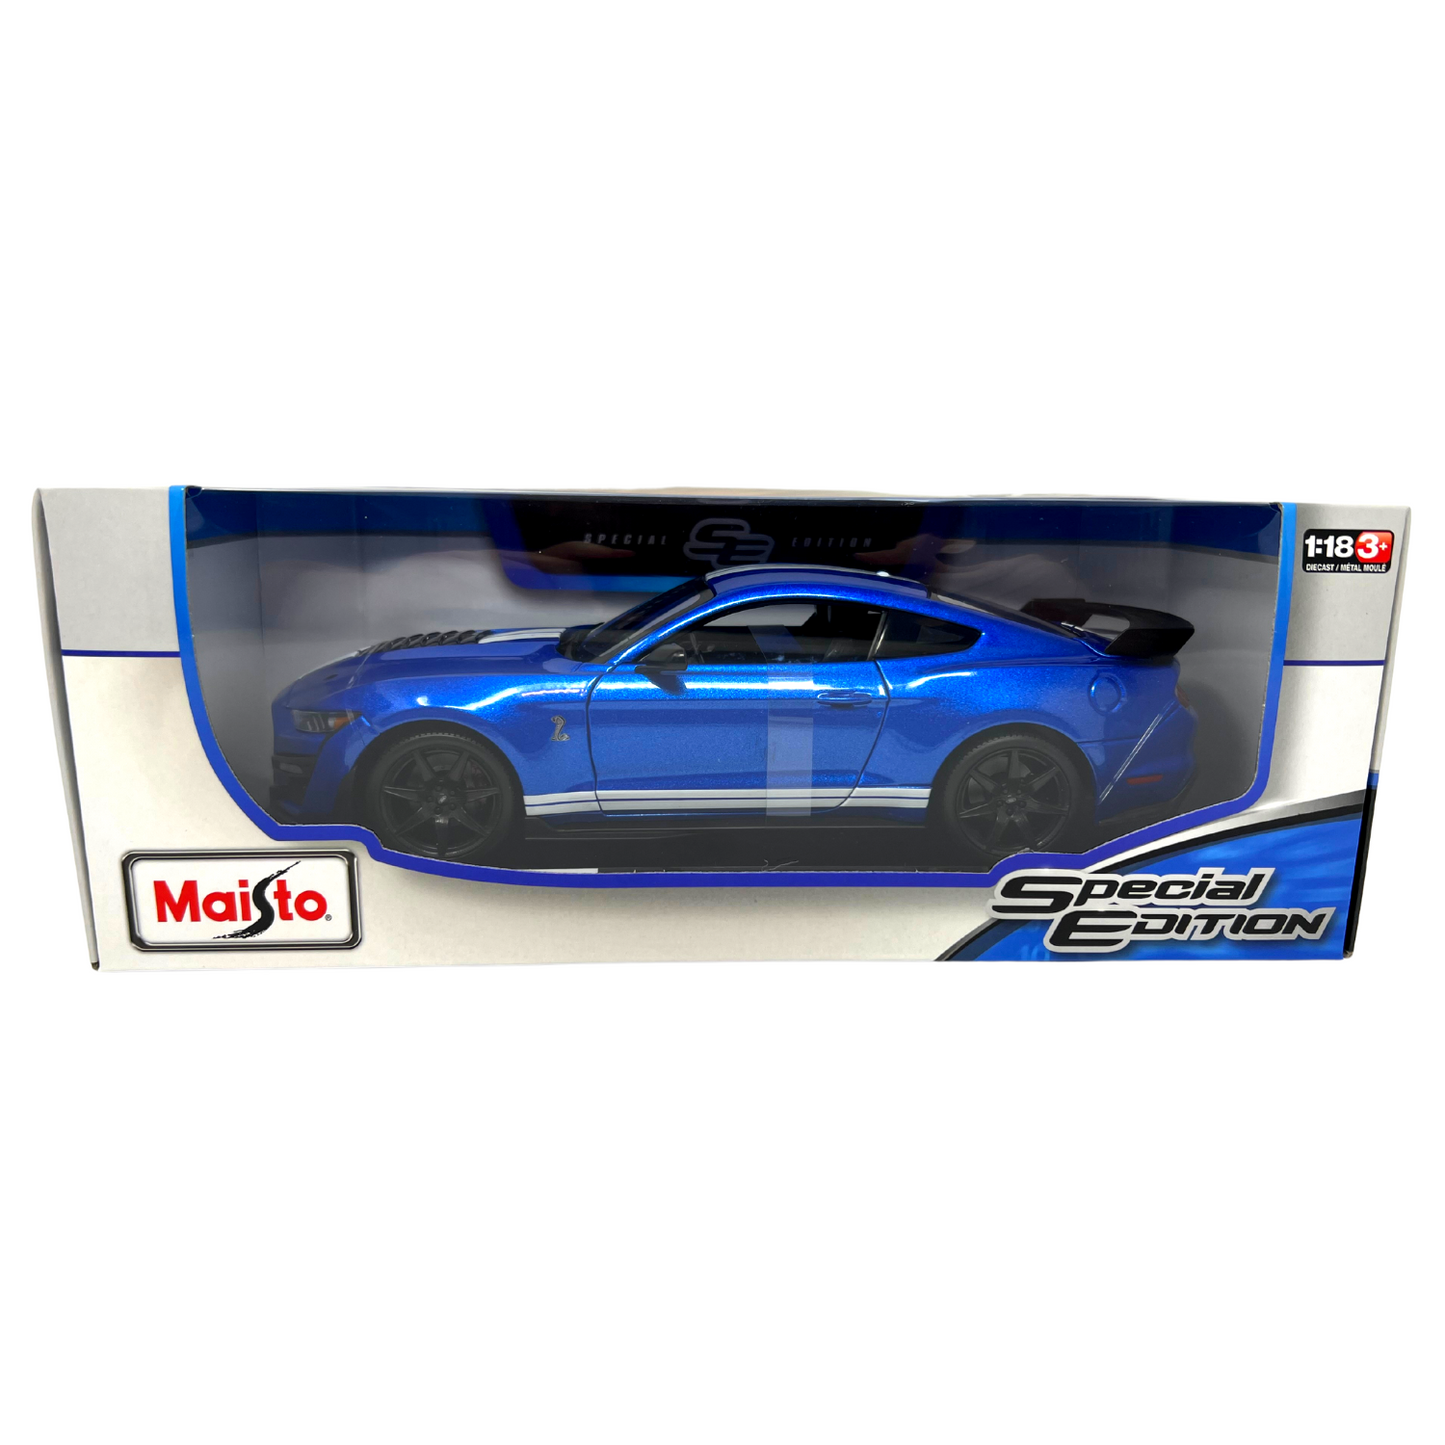 Maisto 2020 Mustang Shelby GT500 Special Edition 1:18 Diecast